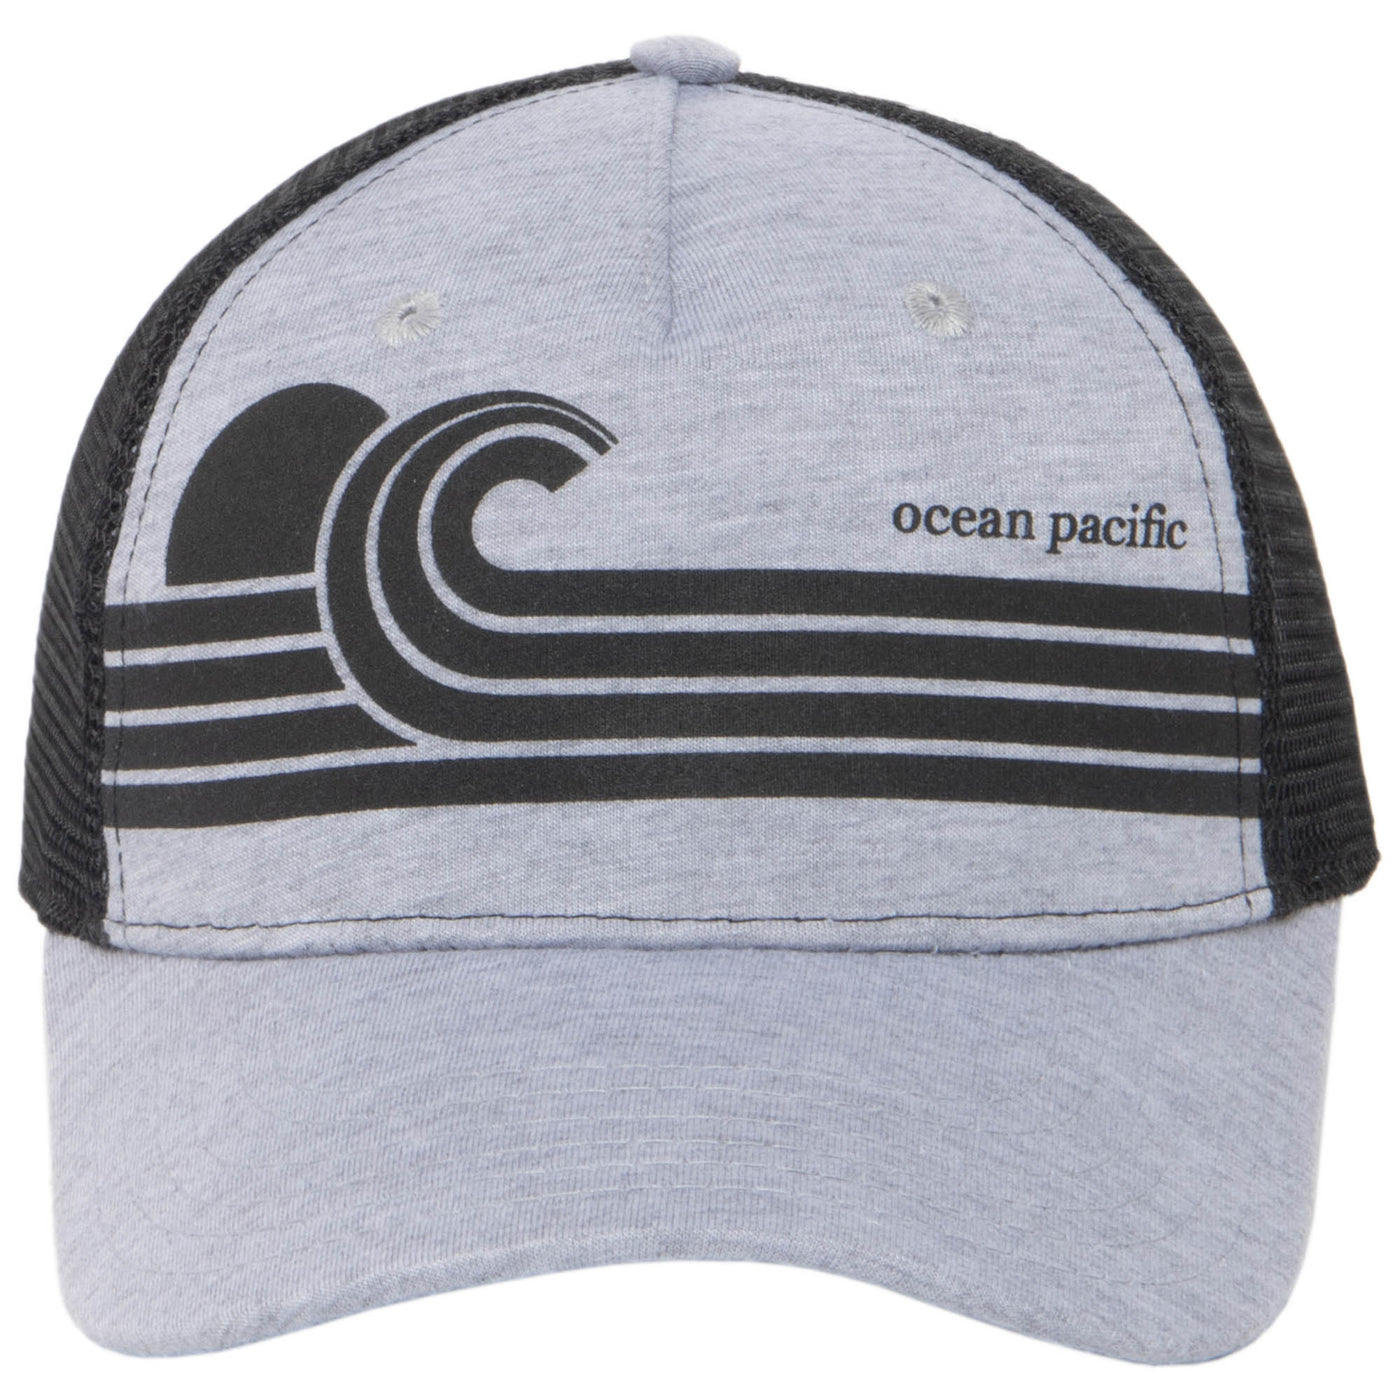 Ocean Pacific - 5 Panel Trucker Hat with Wave Print-Trucker-San Diego Hat Company